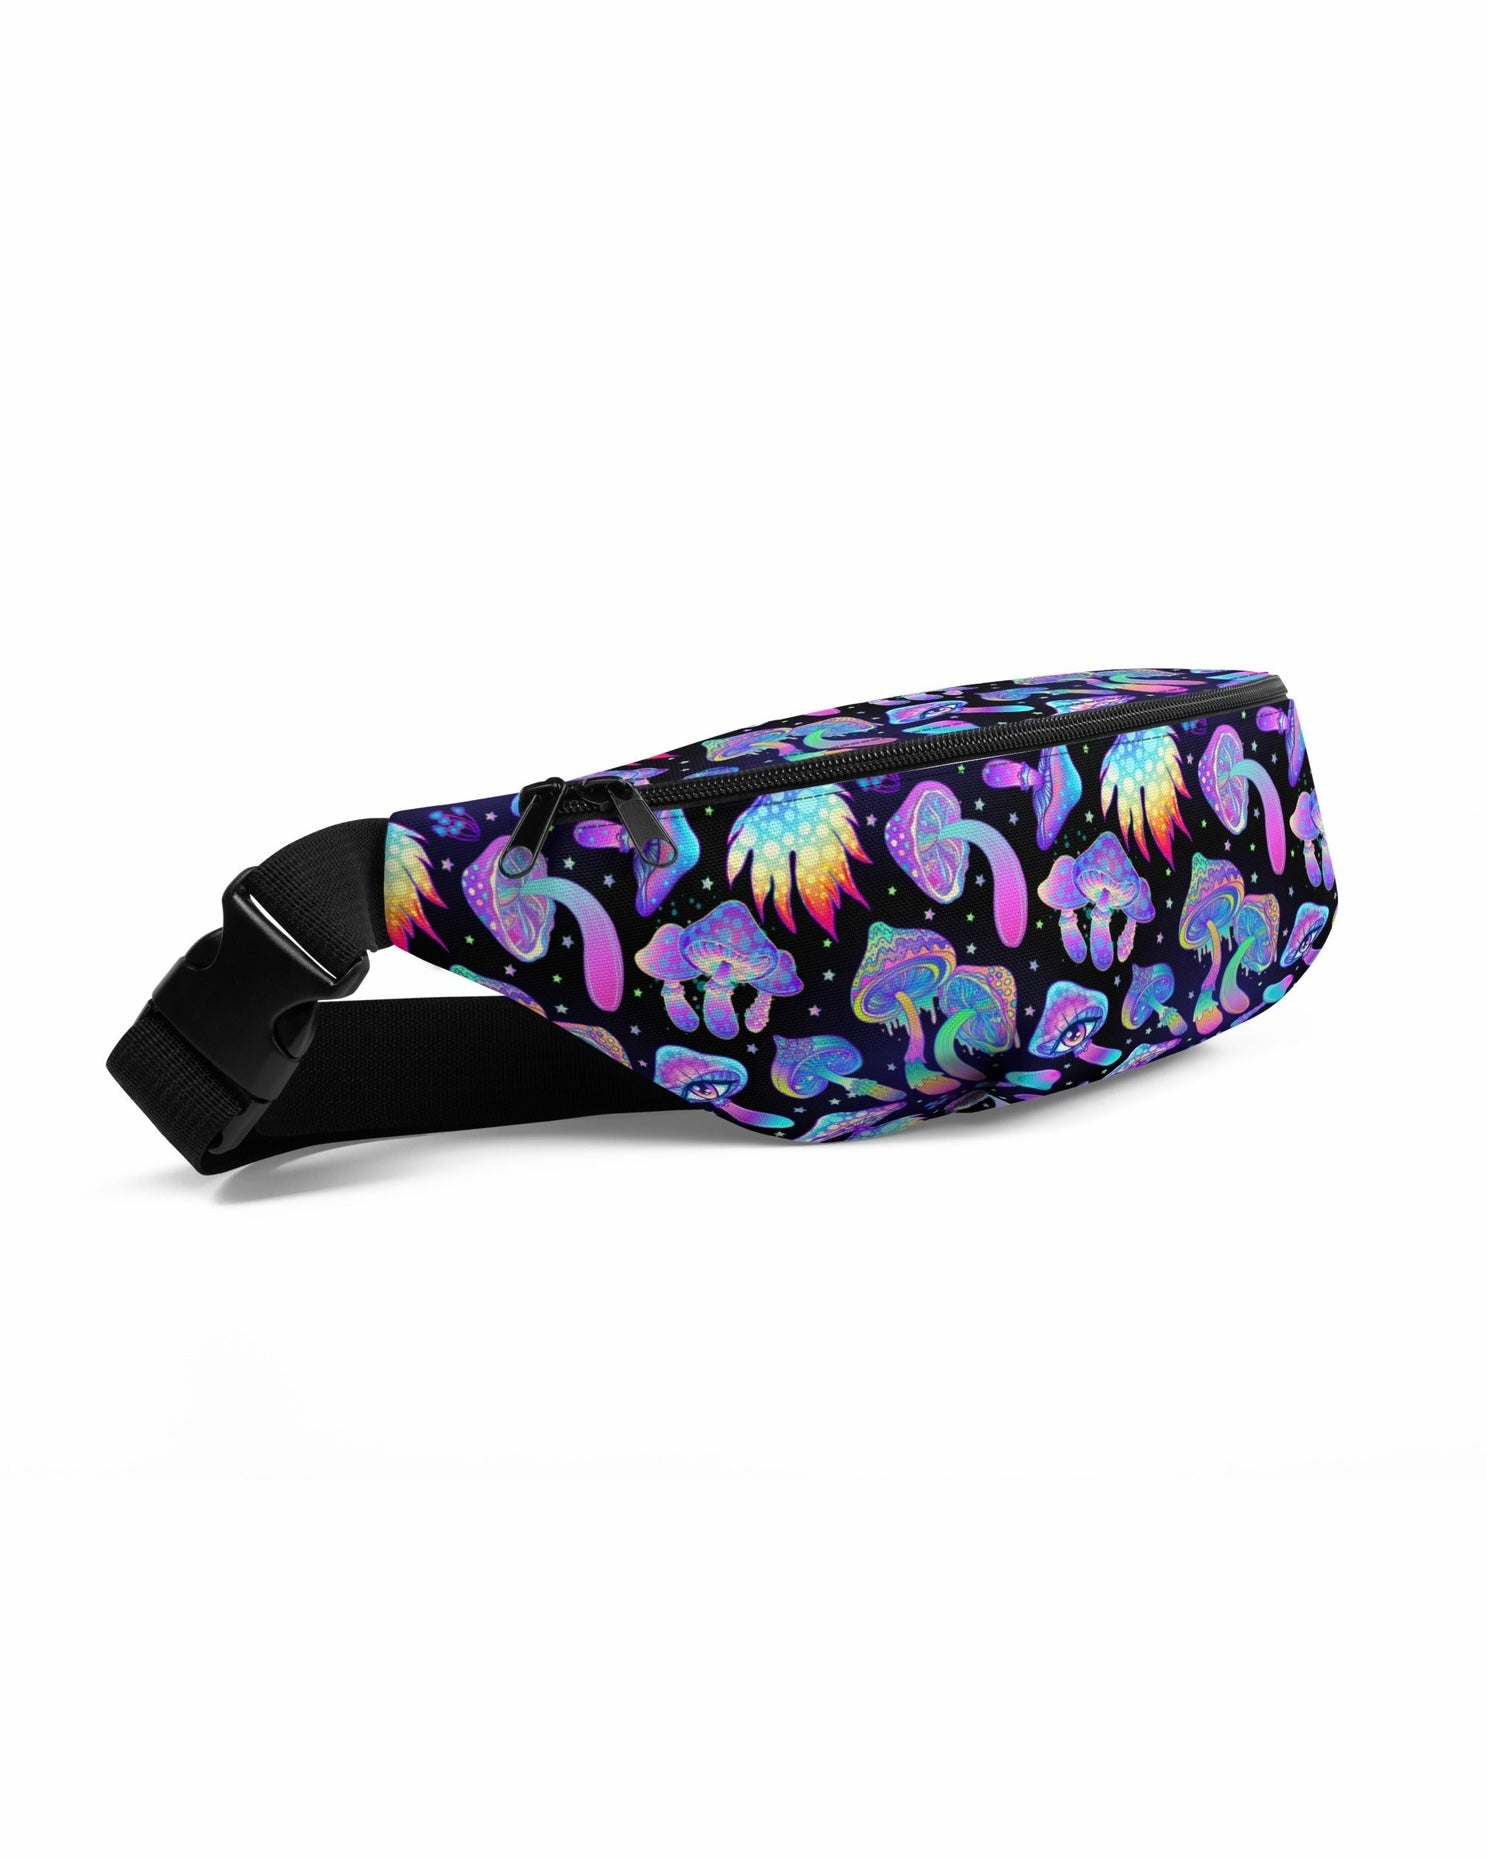 Shroomin Black Fanny Pack, Fanny Pack, - One Stop Rave